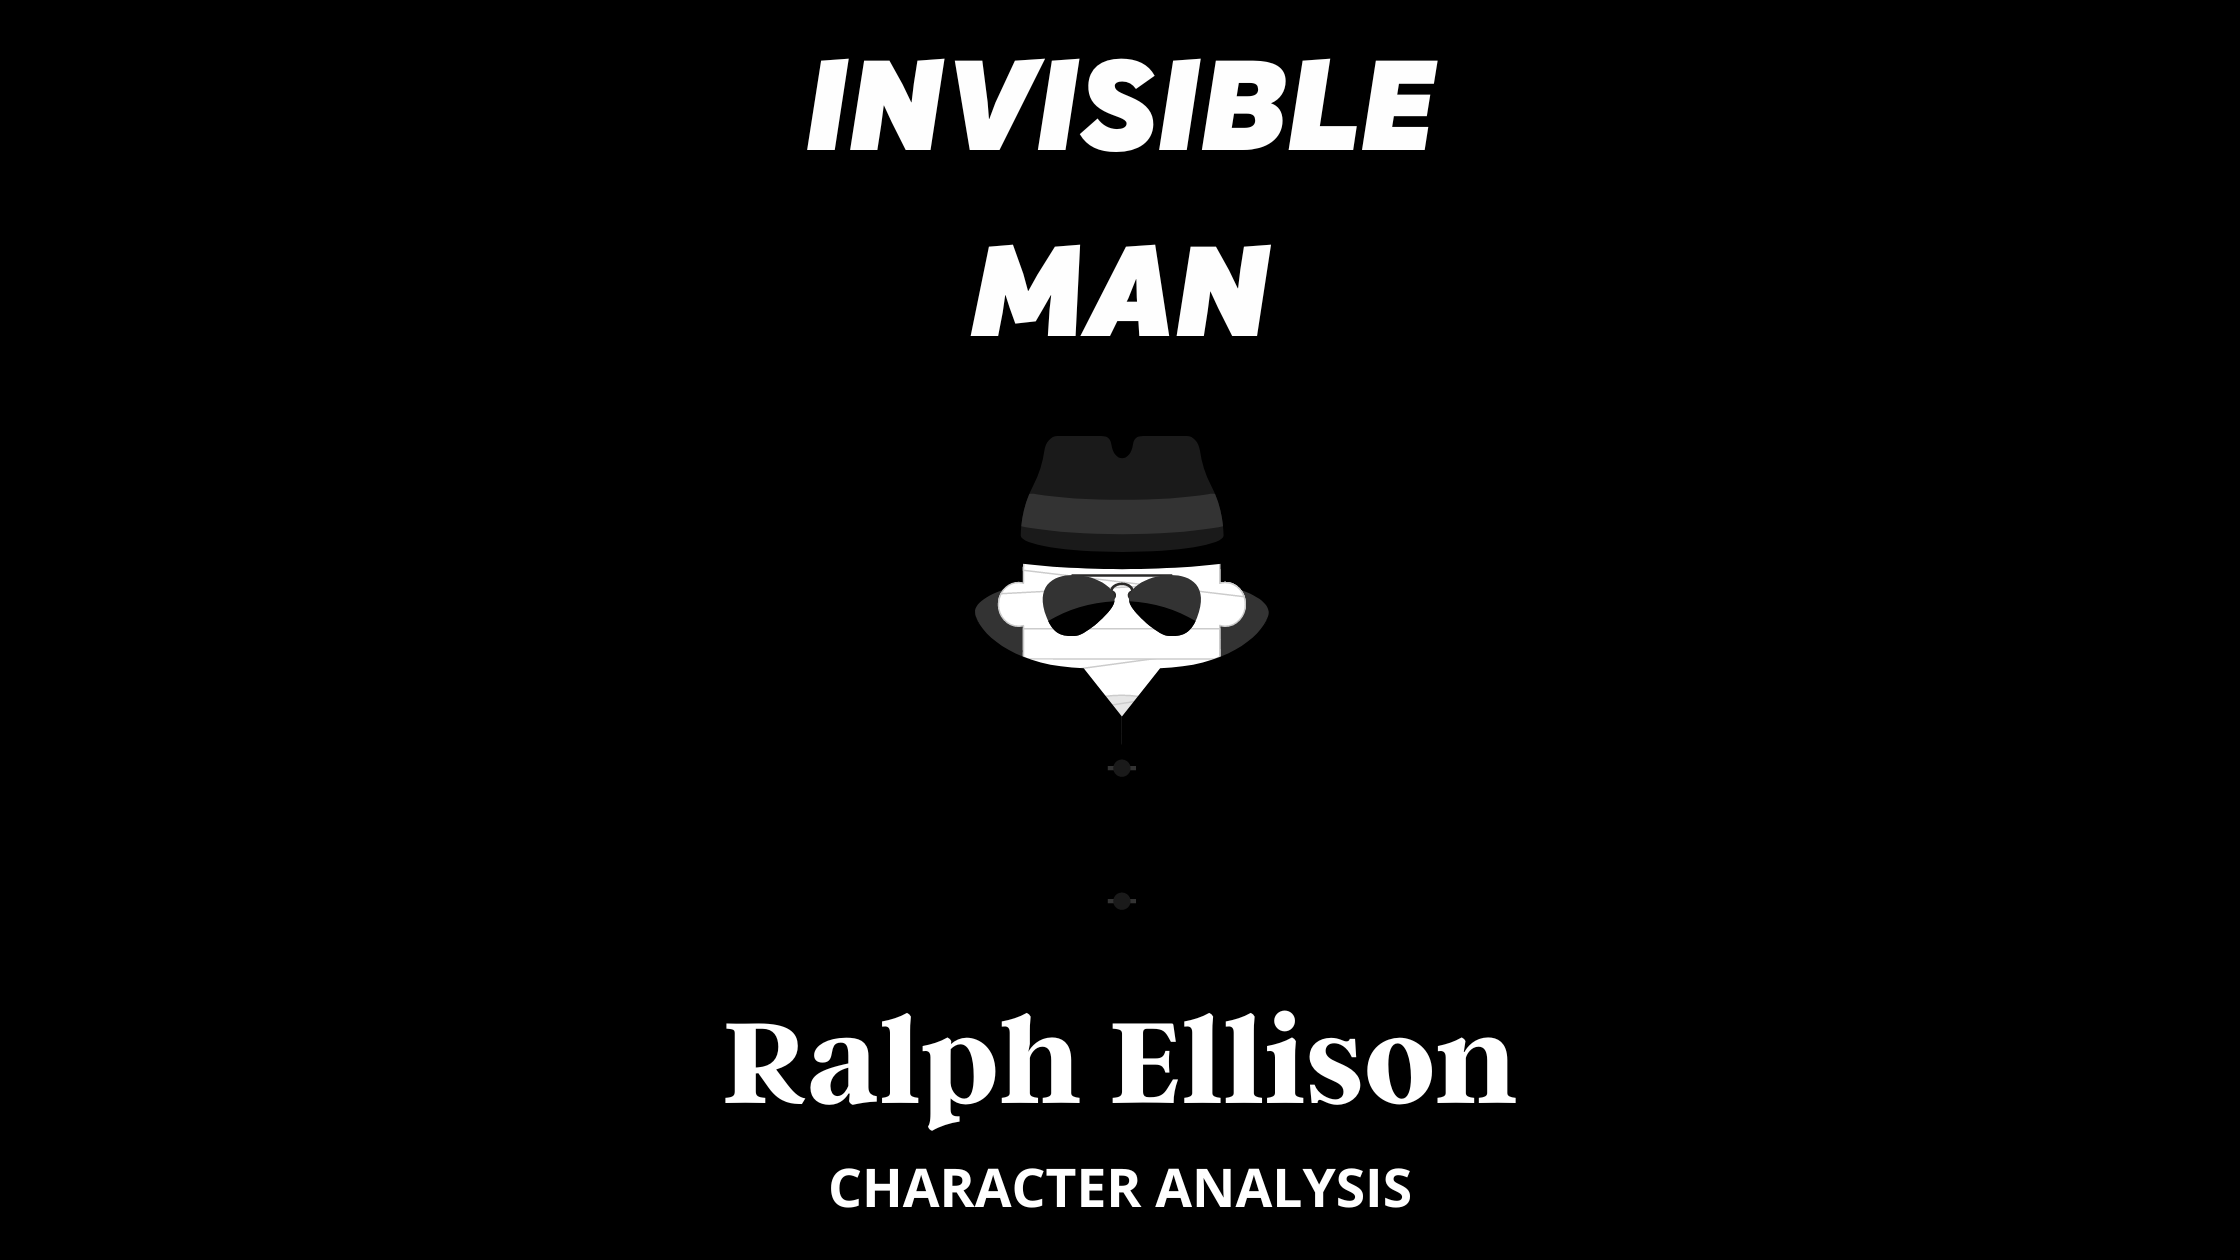 Character Analysis of the Invisible Man by Ralph Ellison